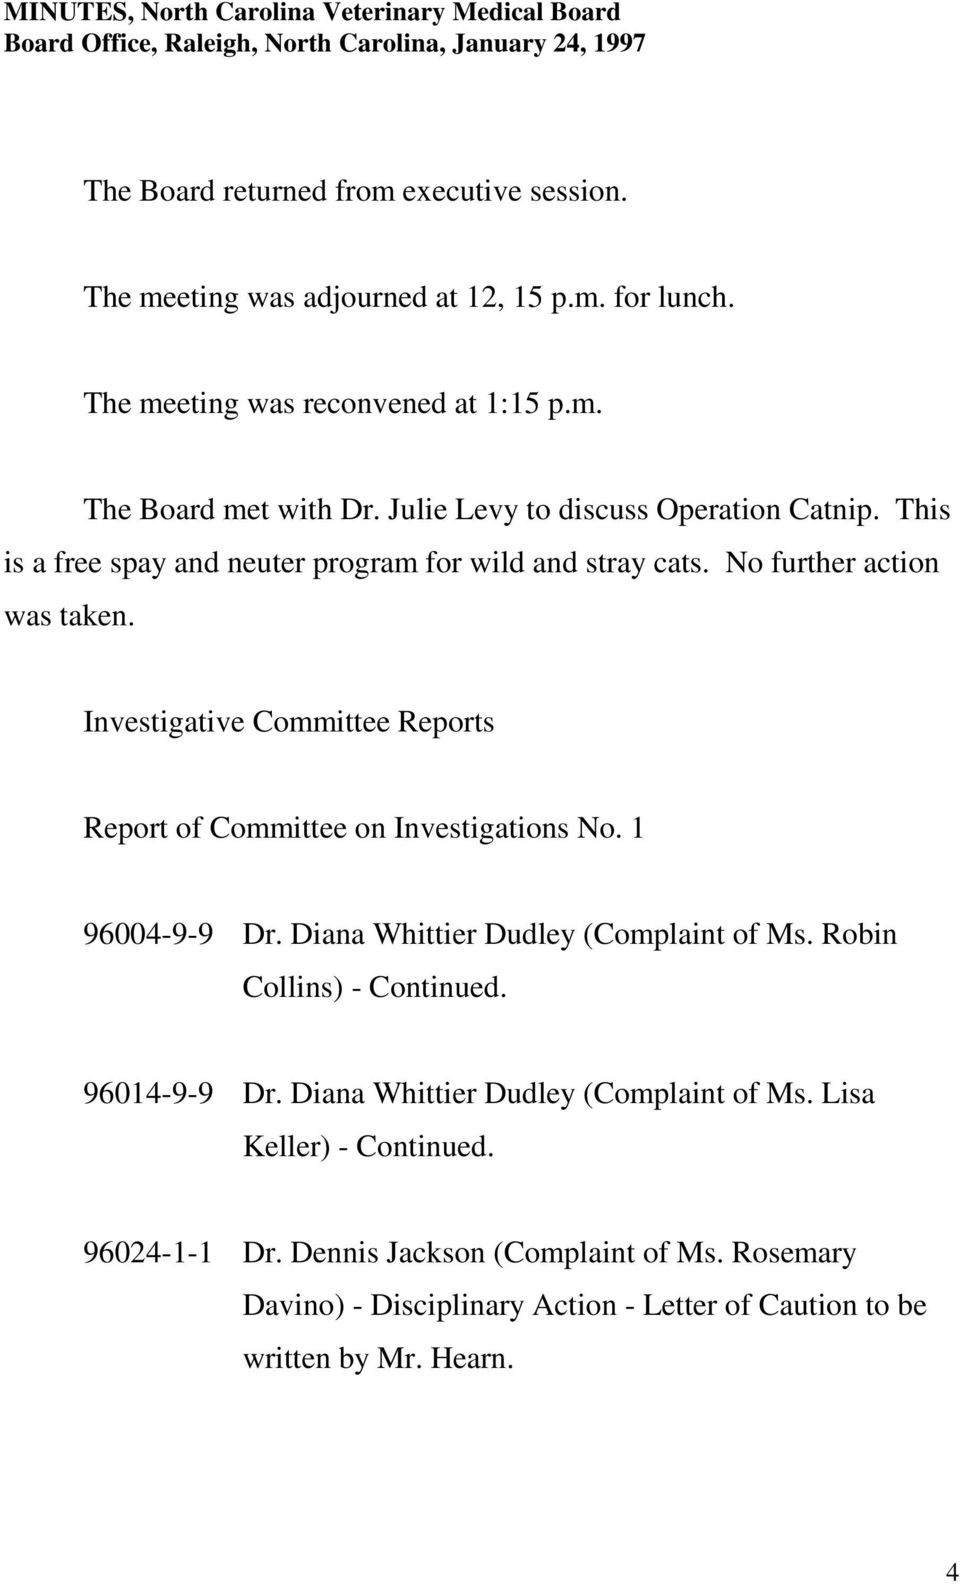 Investigative Committee Reports Report of Committee on Investigations No. 1 96004-9-9 Dr. Diana Whittier Dudley (Complaint of Ms. Robin Collins) - Continued.